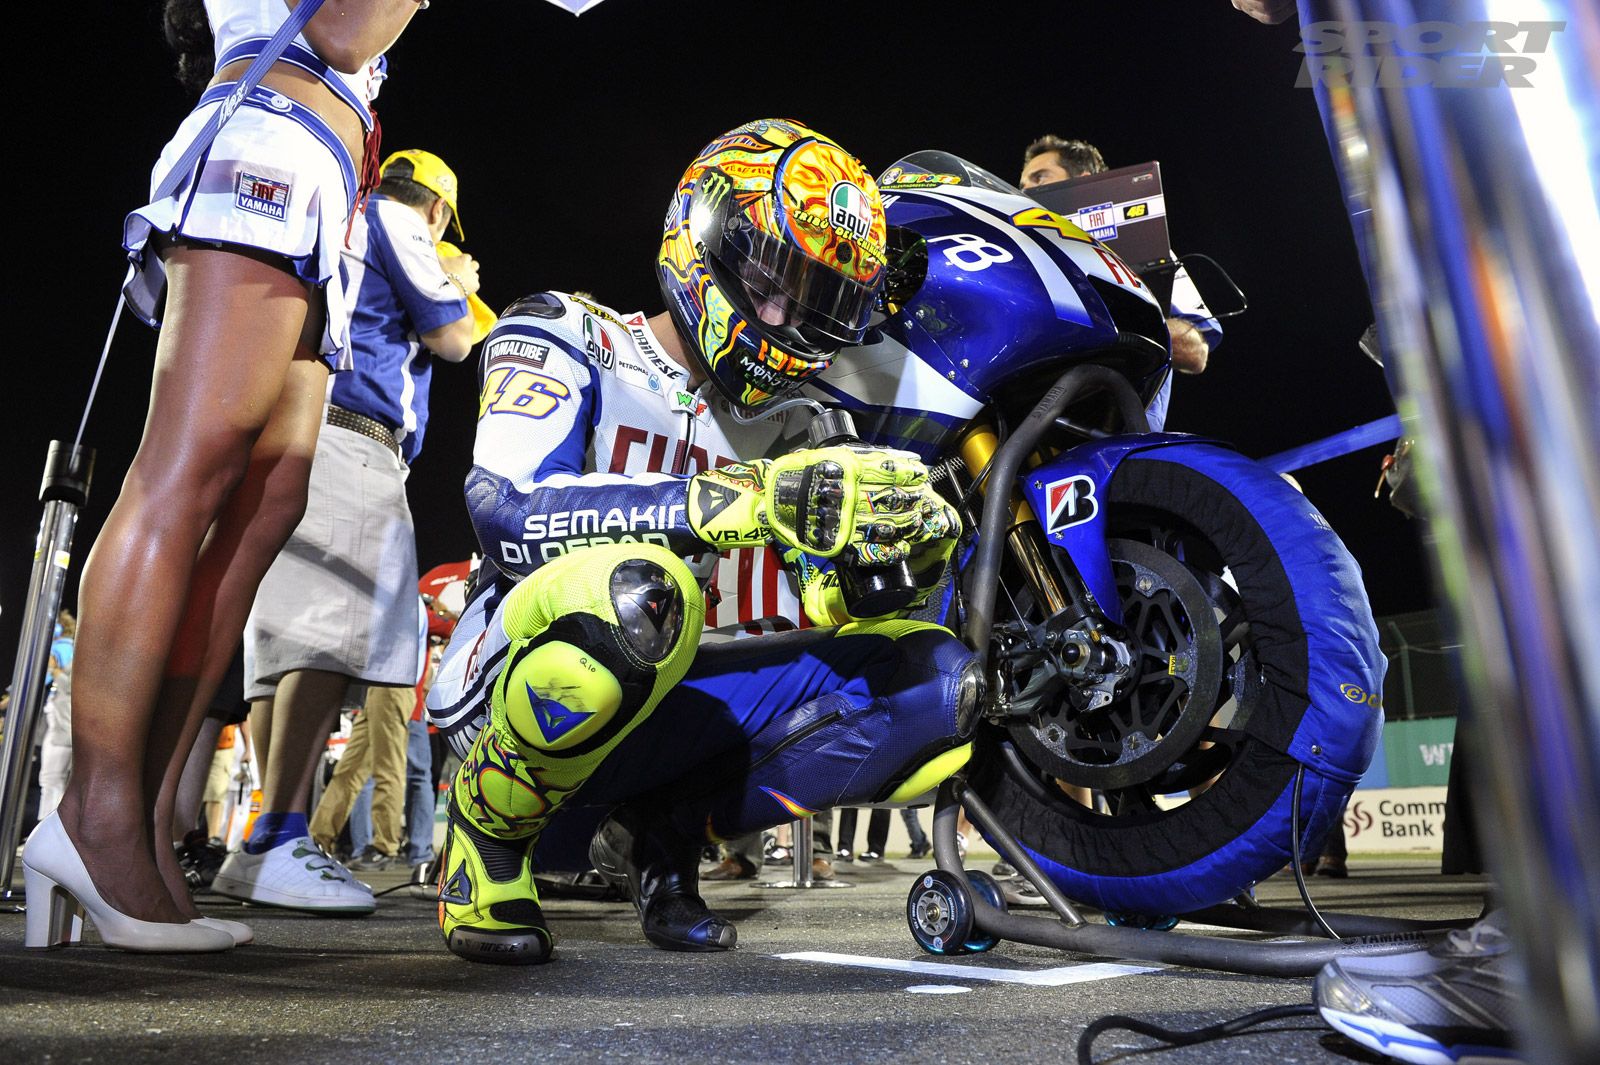 Wallpaper Valentino Rossi Hd Early Imageif With Cartoon - Valentino Rossi Wallpaper Hd - HD Wallpaper 